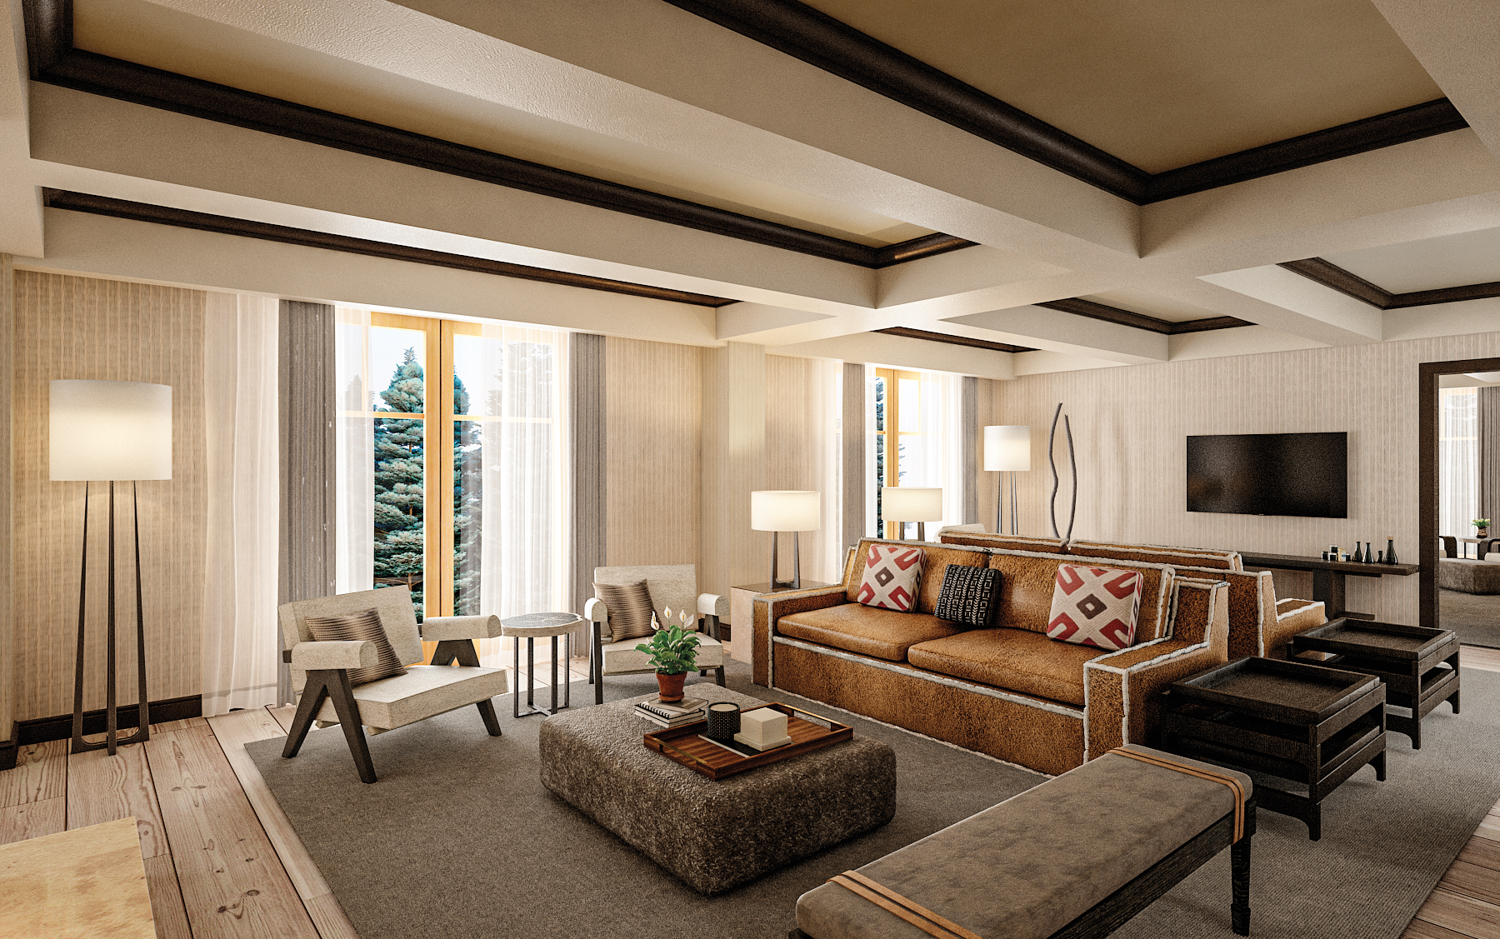 Suite at the Ritz Carlton, Bachelor Gulch hotel with sofas, arm chairs and banquettes